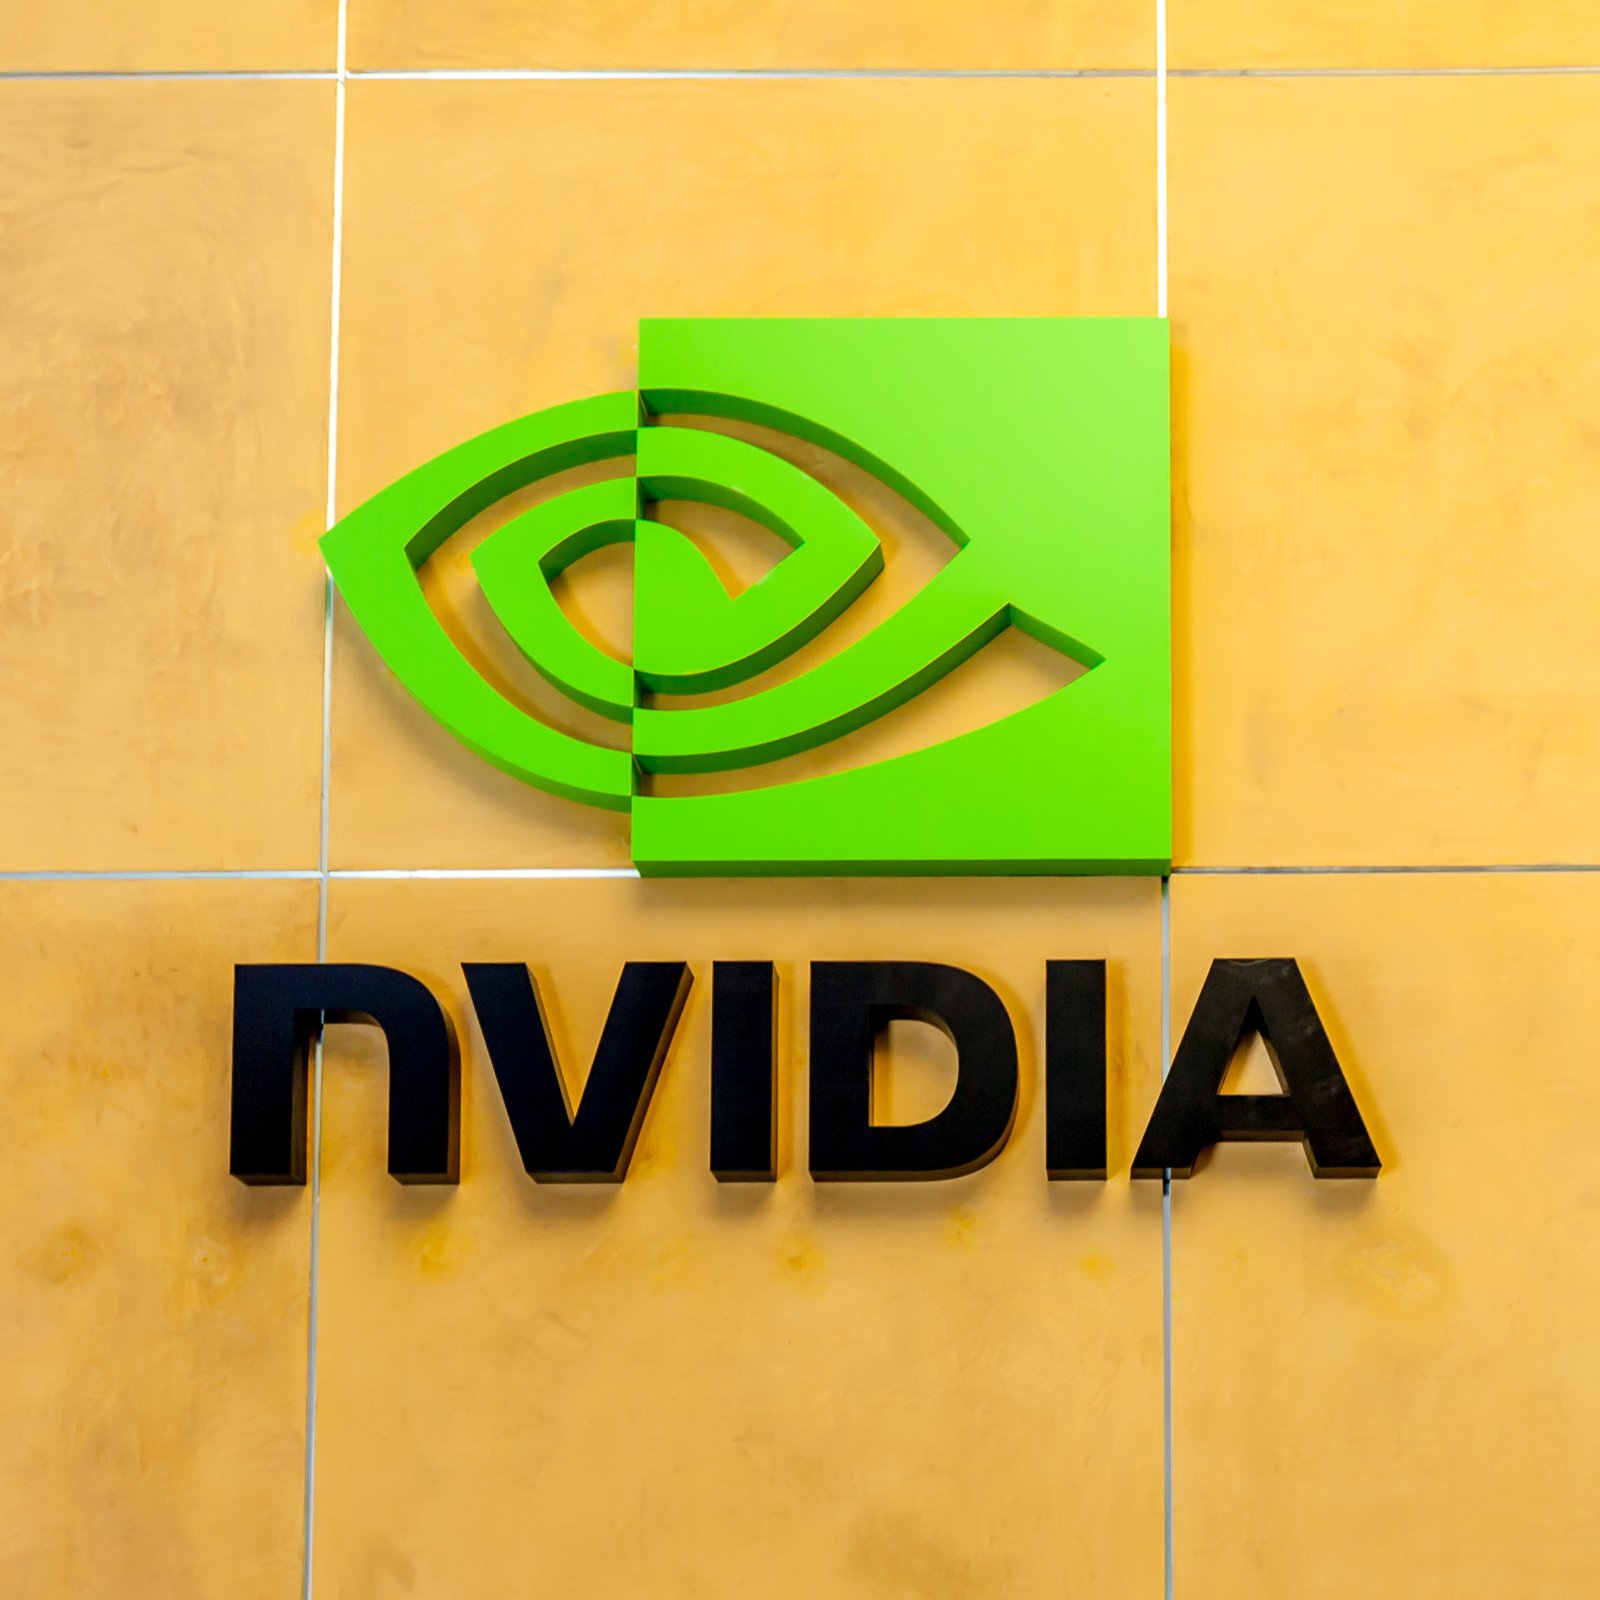 Nvidia Reports $289 Million Revenue from the Crypto Sector in Q1